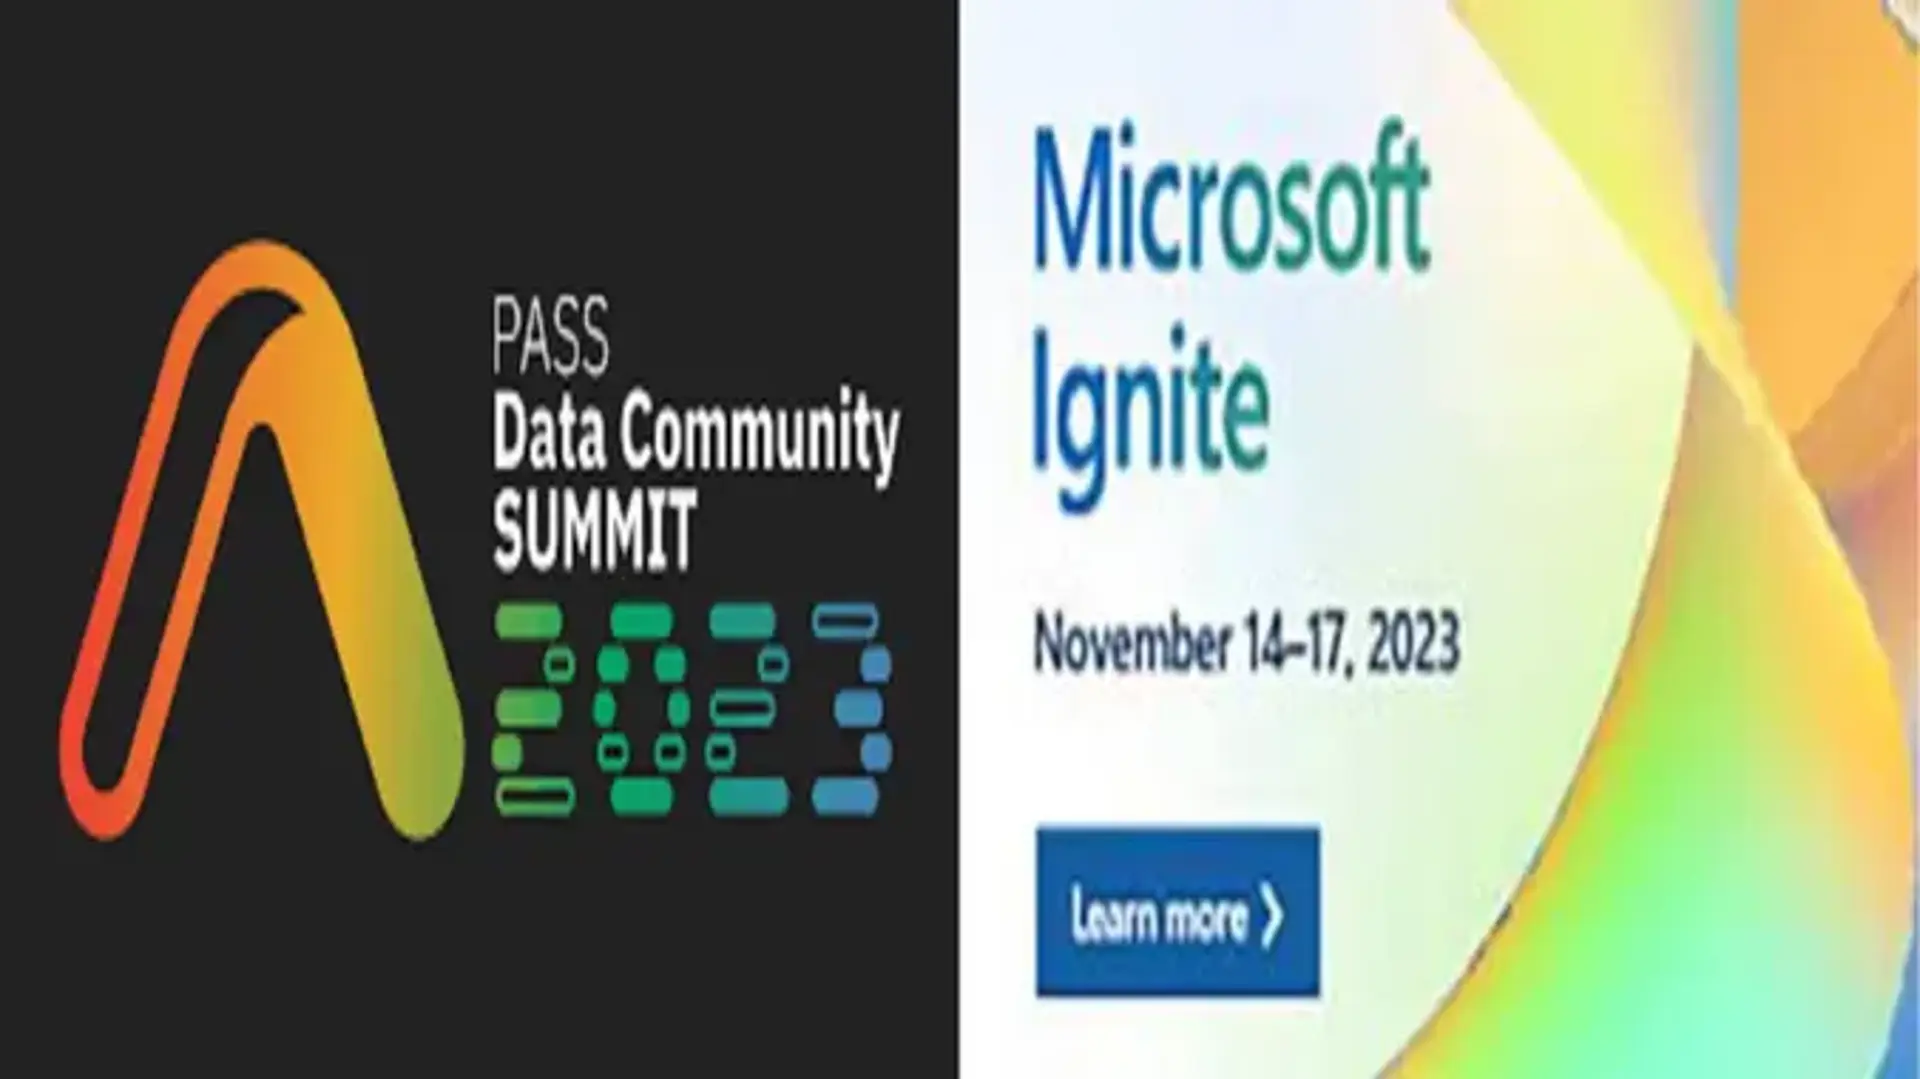 PASS Summit and Ignite 2023 Announcements - Artificial Intelligence